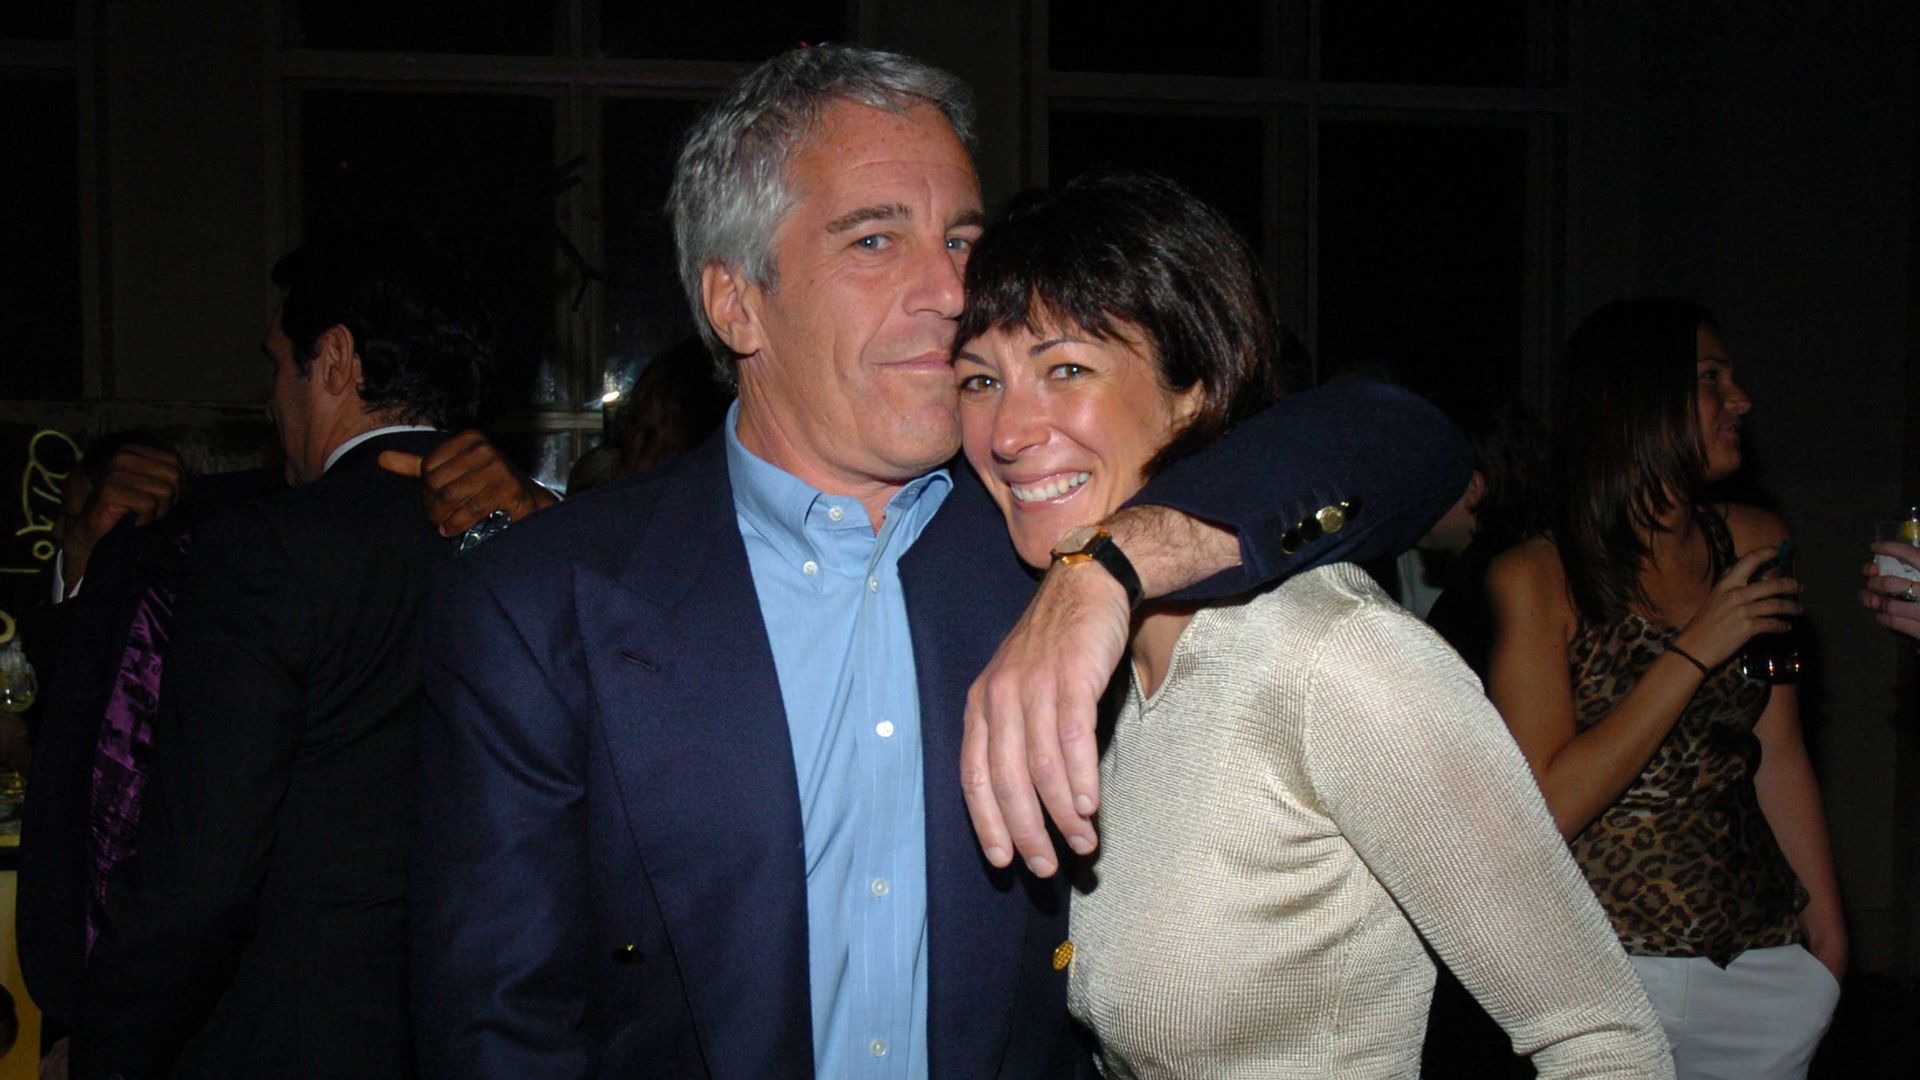 Jeffrey Epstein and Ghislaine Maxwell attend de Grisogono Sponsors The 2005 Wall Street Concert Series Benefitting Wall Street Rising, with a Performance by Rod Stewart at Cipriani Wall Street on March 15, 2005 in New York City. 